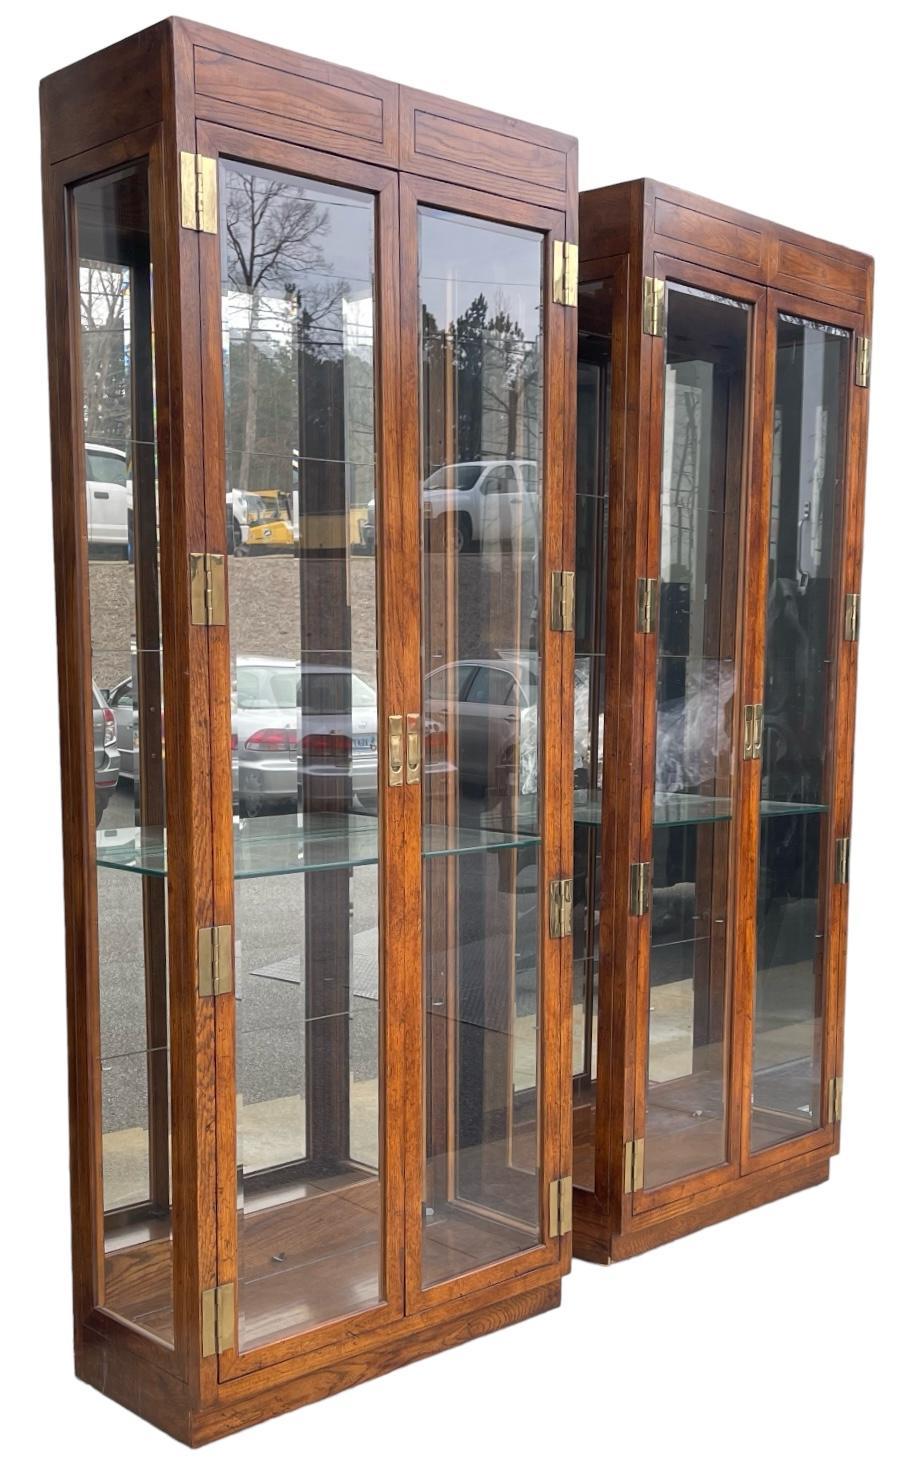 Henredon British Colonial / Campaign Style Display / Vitrine Cabinets - Pair For Sale 4